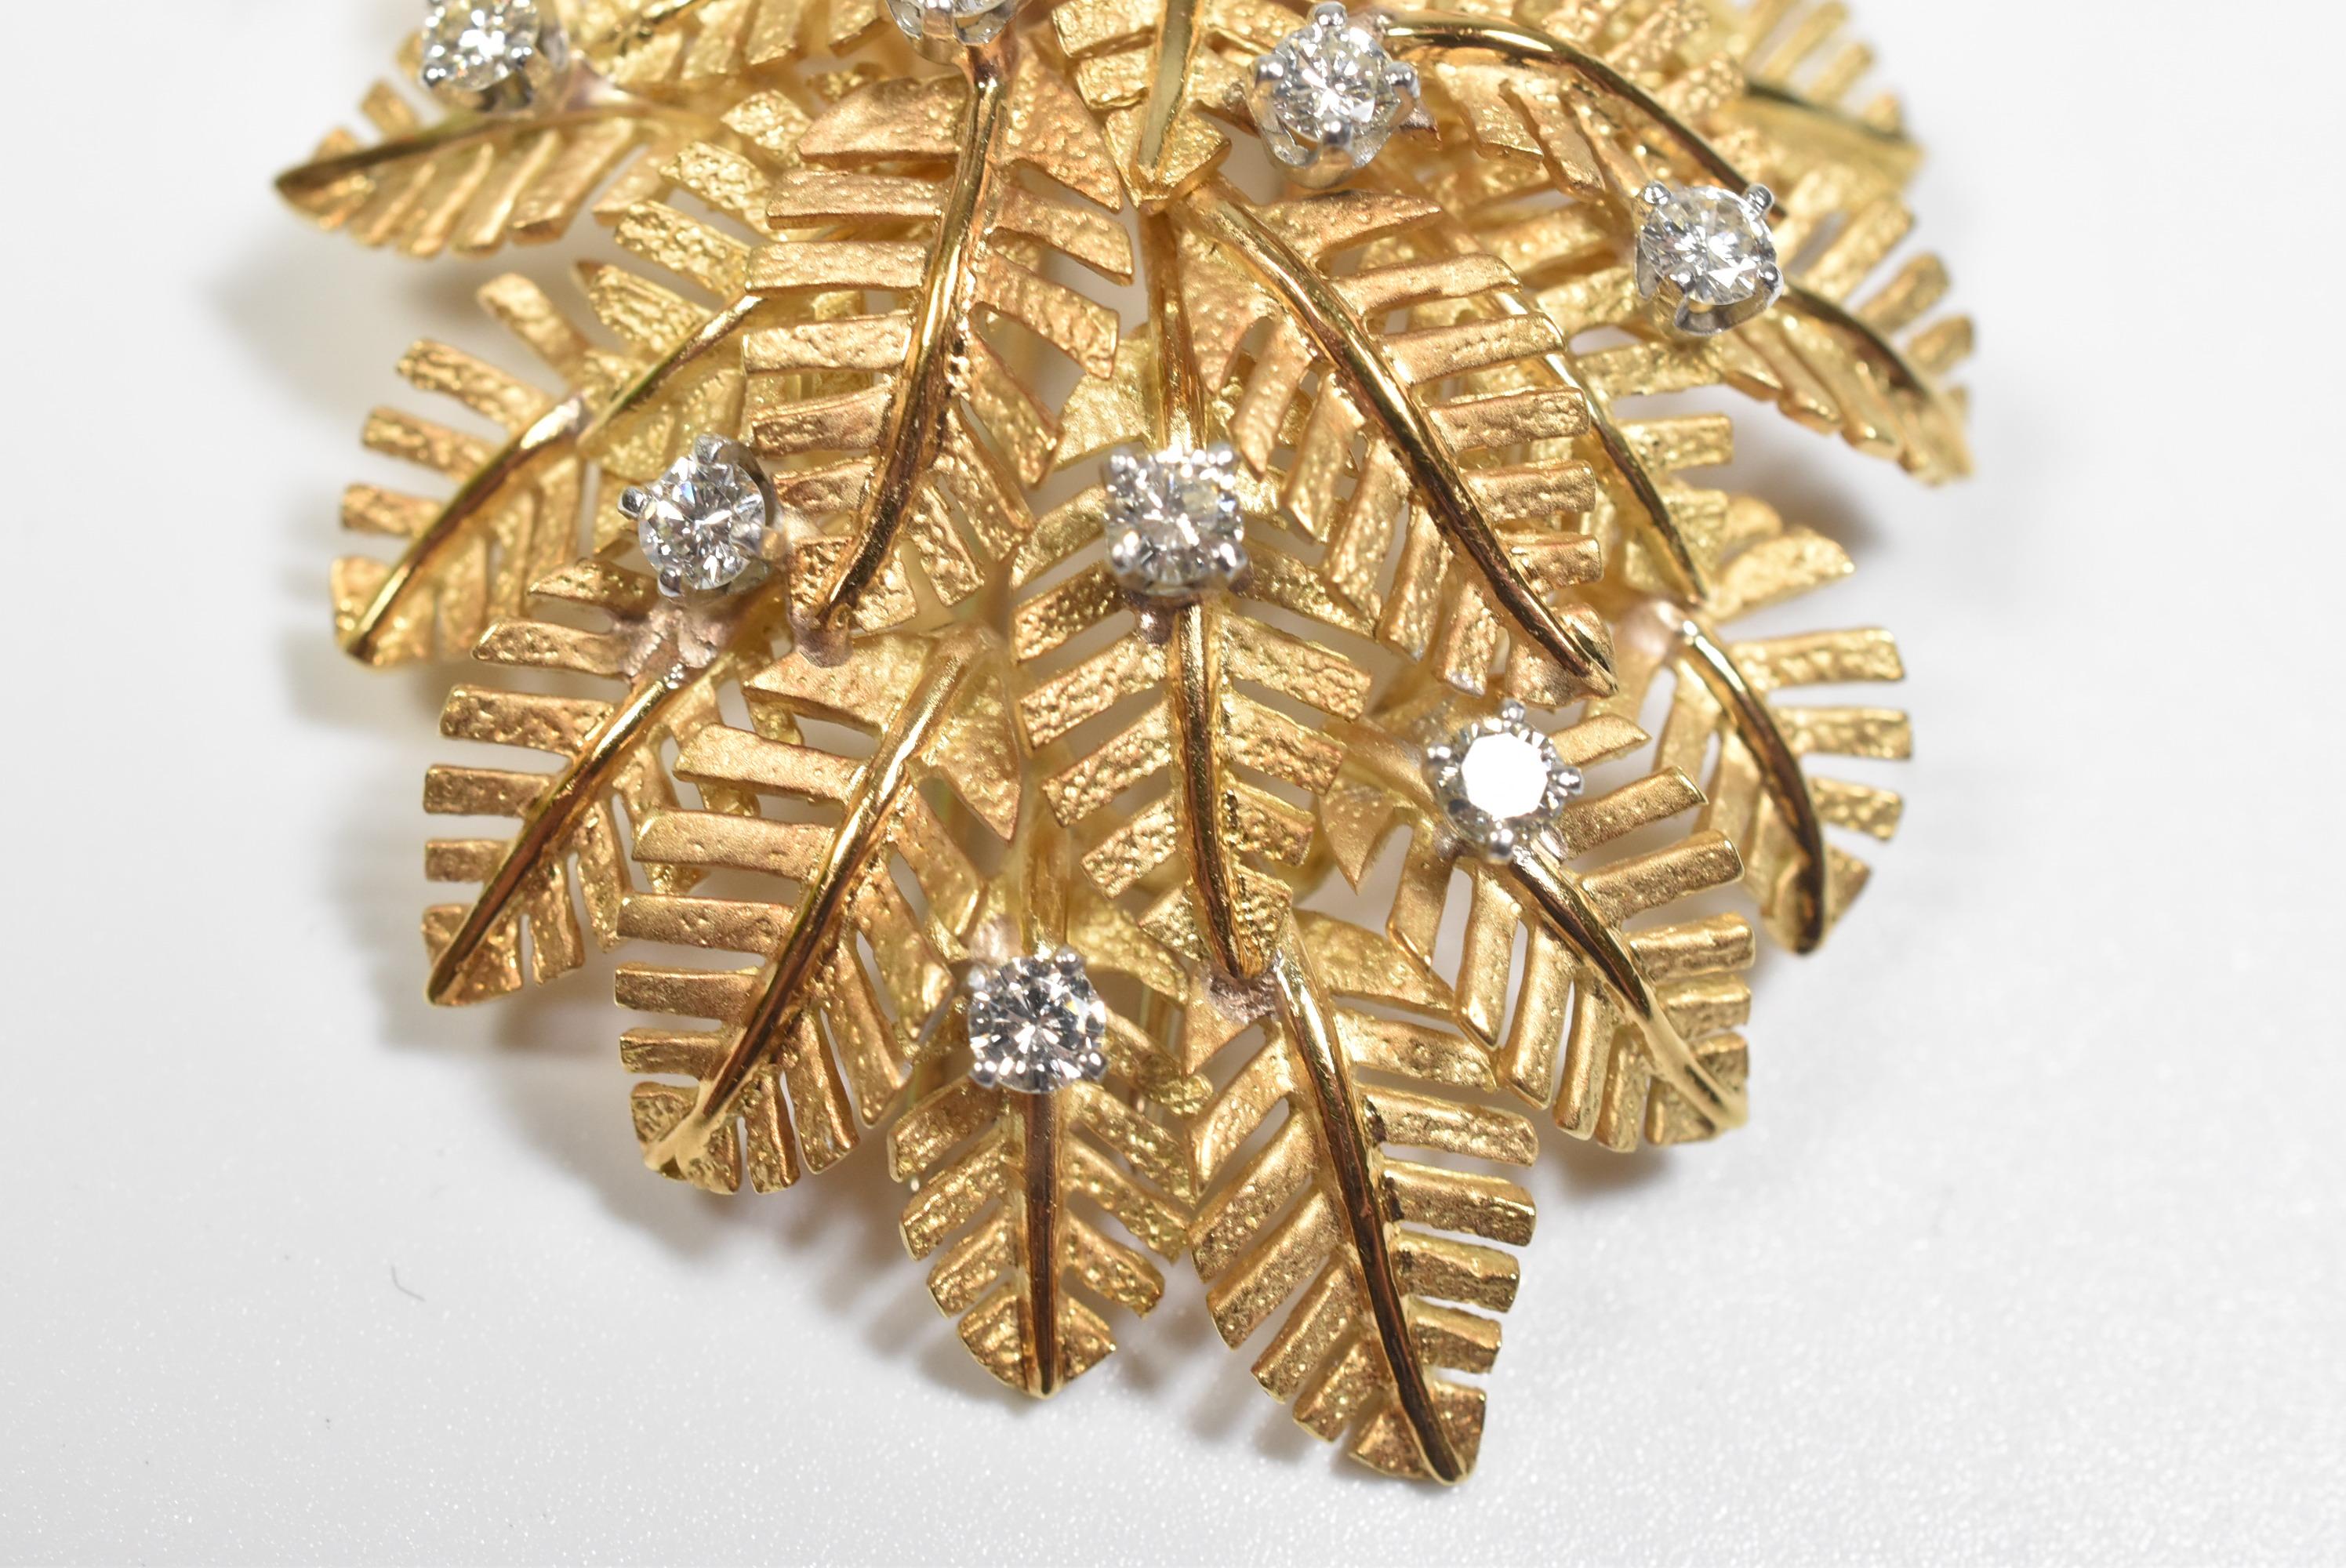 18K gold palm leaf pin or brooch with diamonds. Pin is 2.25